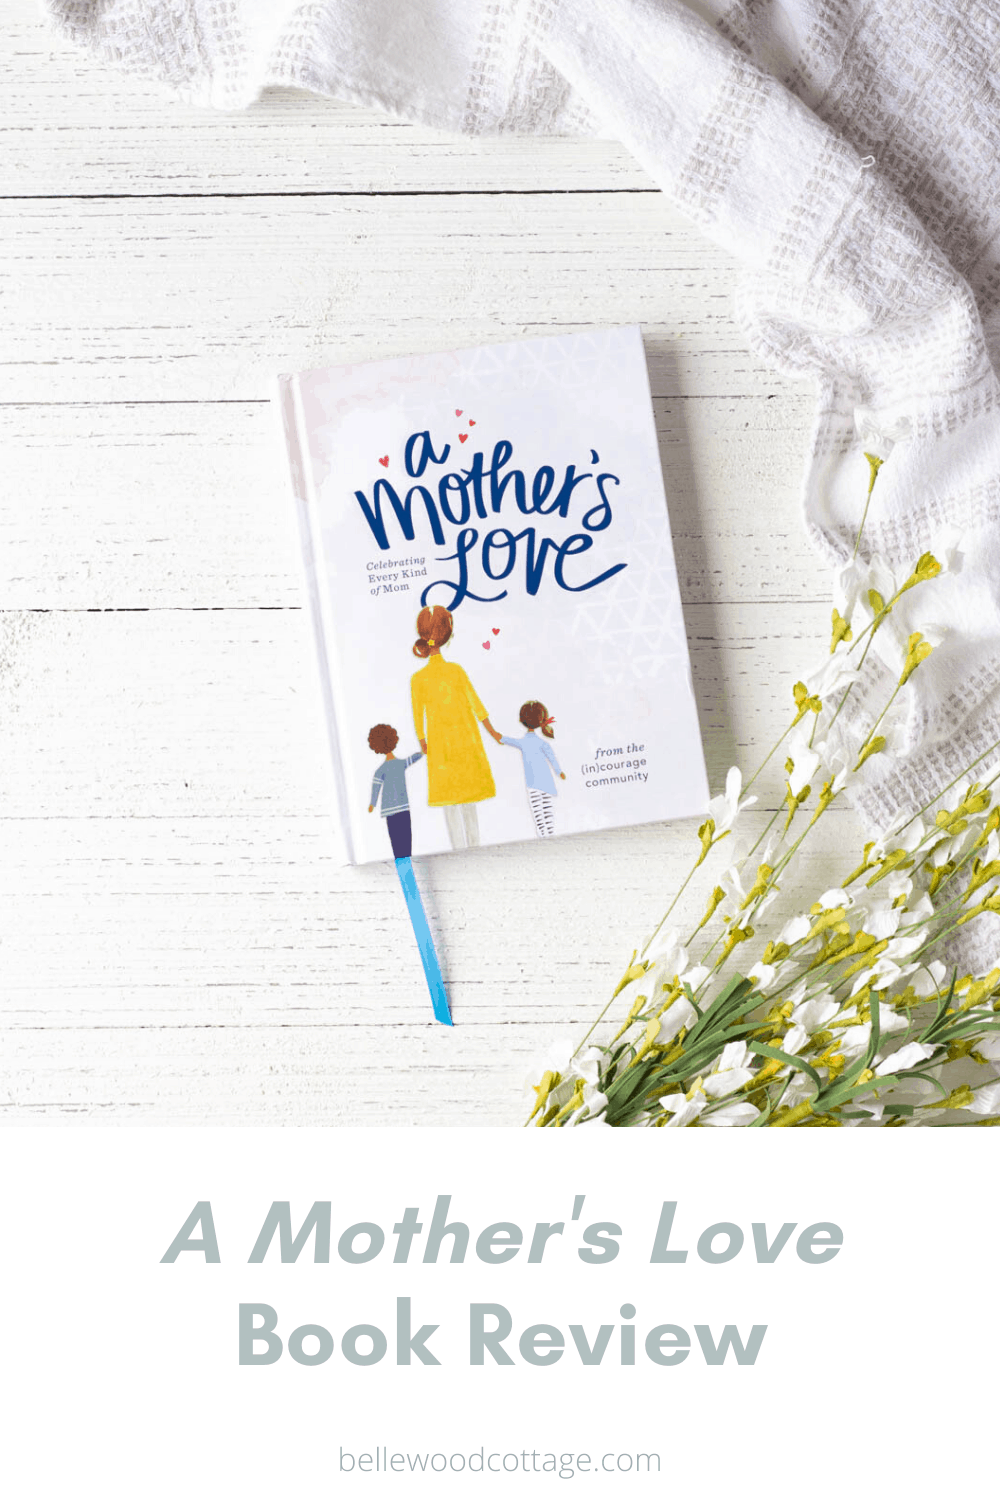 A book, titled A Mother's Love, on a wooden surface.